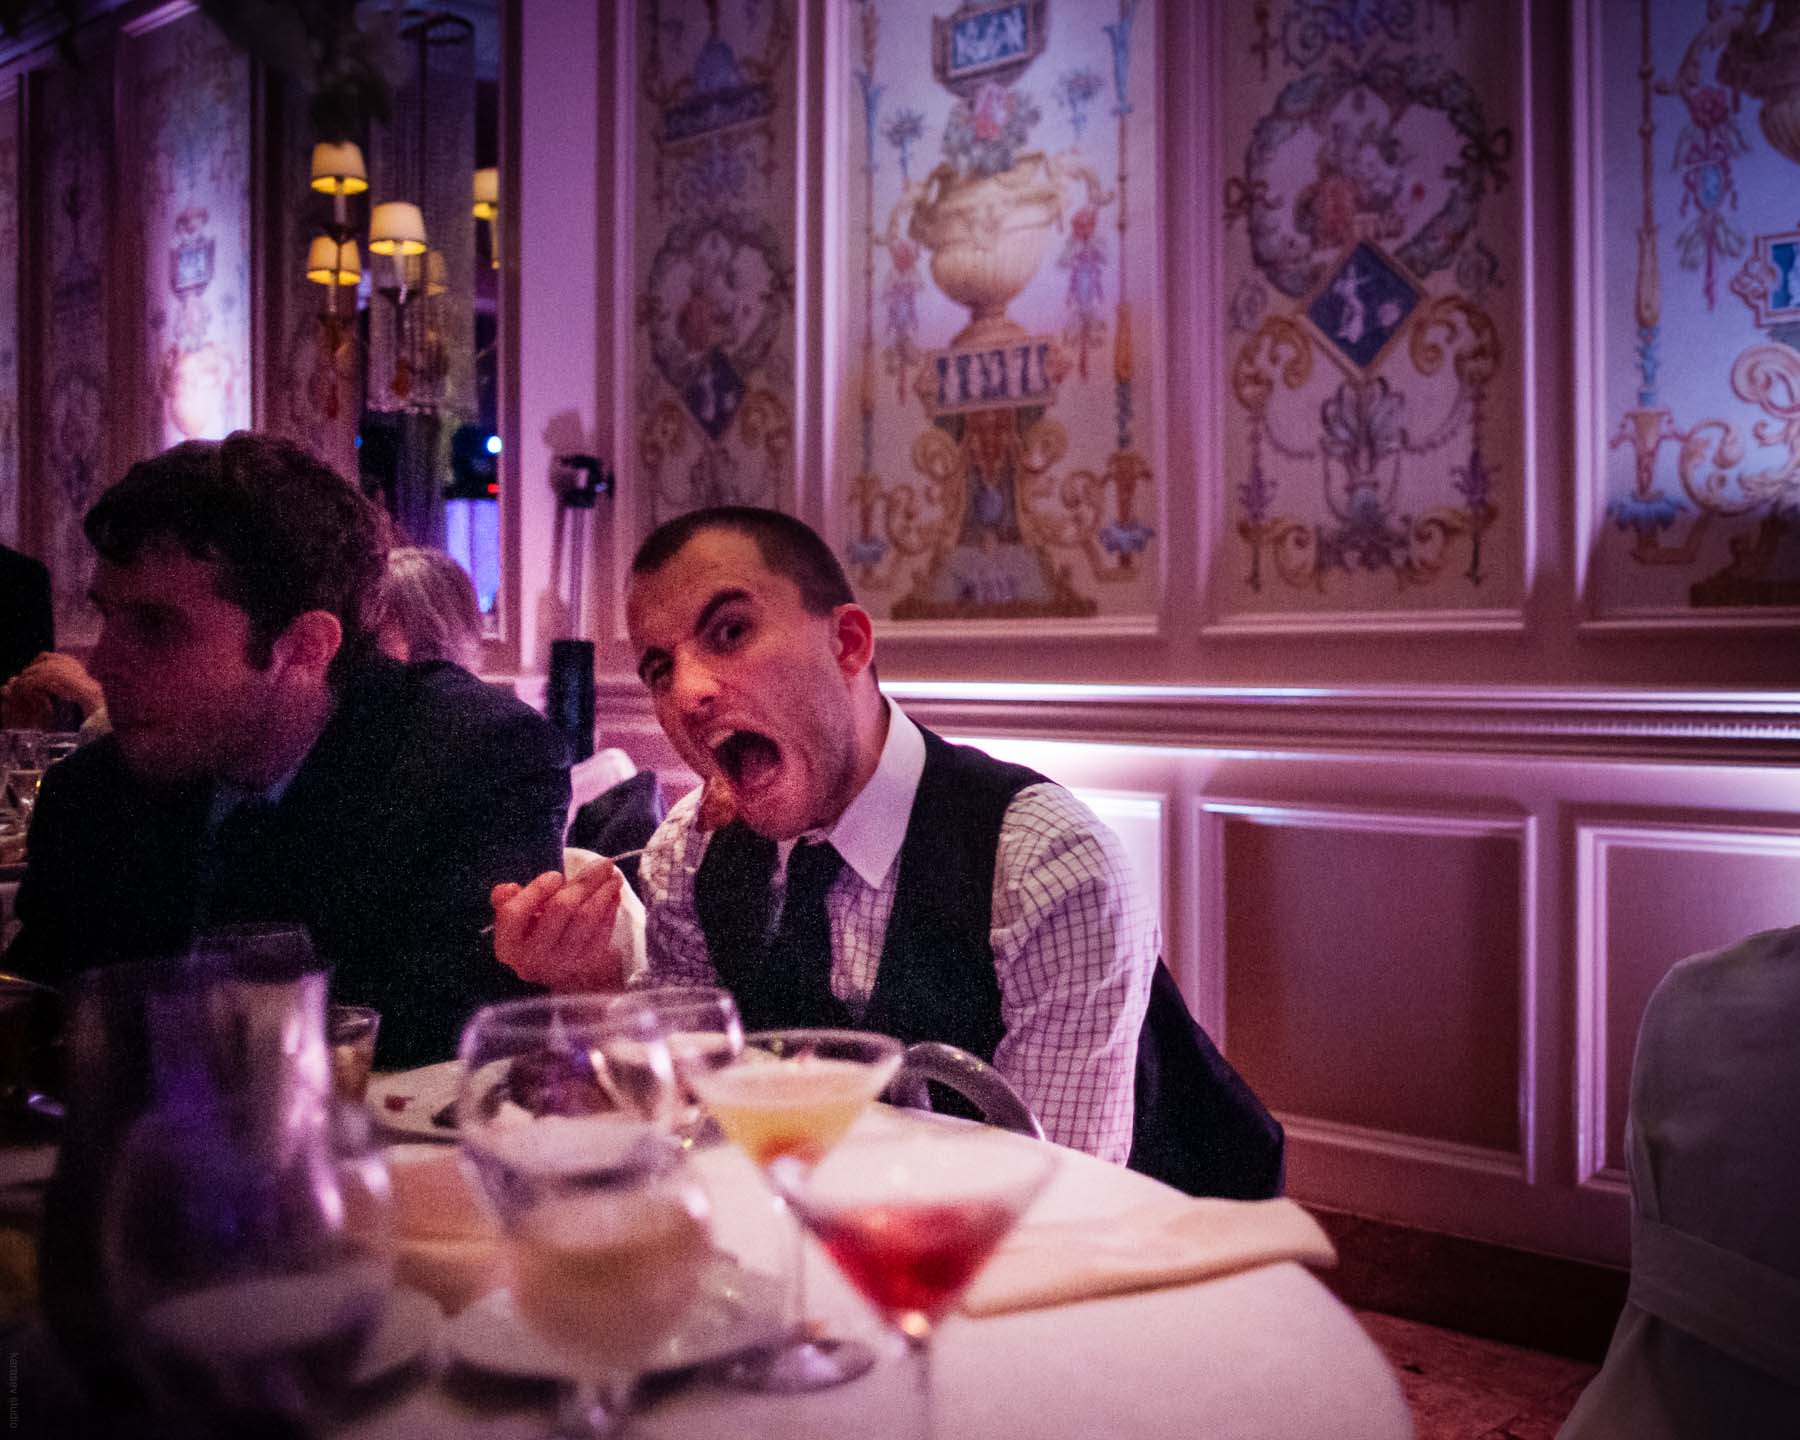 Seven-year-old girl uses a full frame DSLR to capture a wedding guest eating